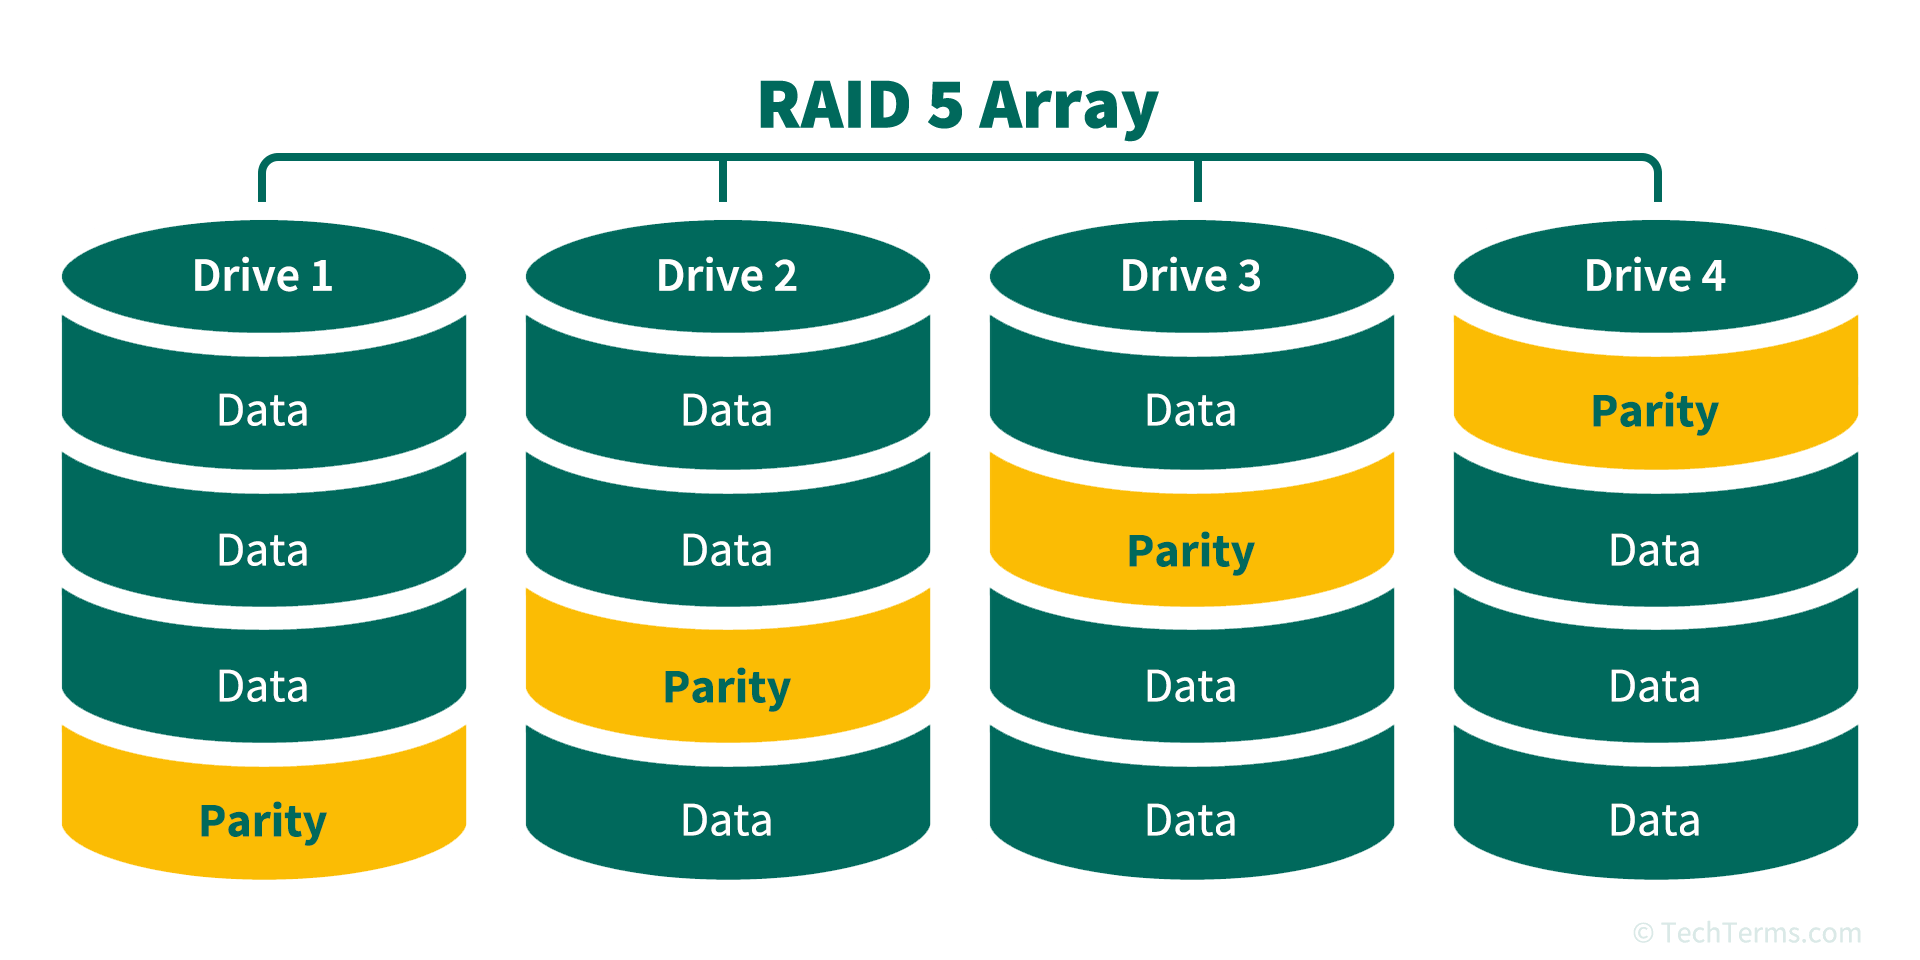 What is a Raid? [Gaming Definition, Meaning]